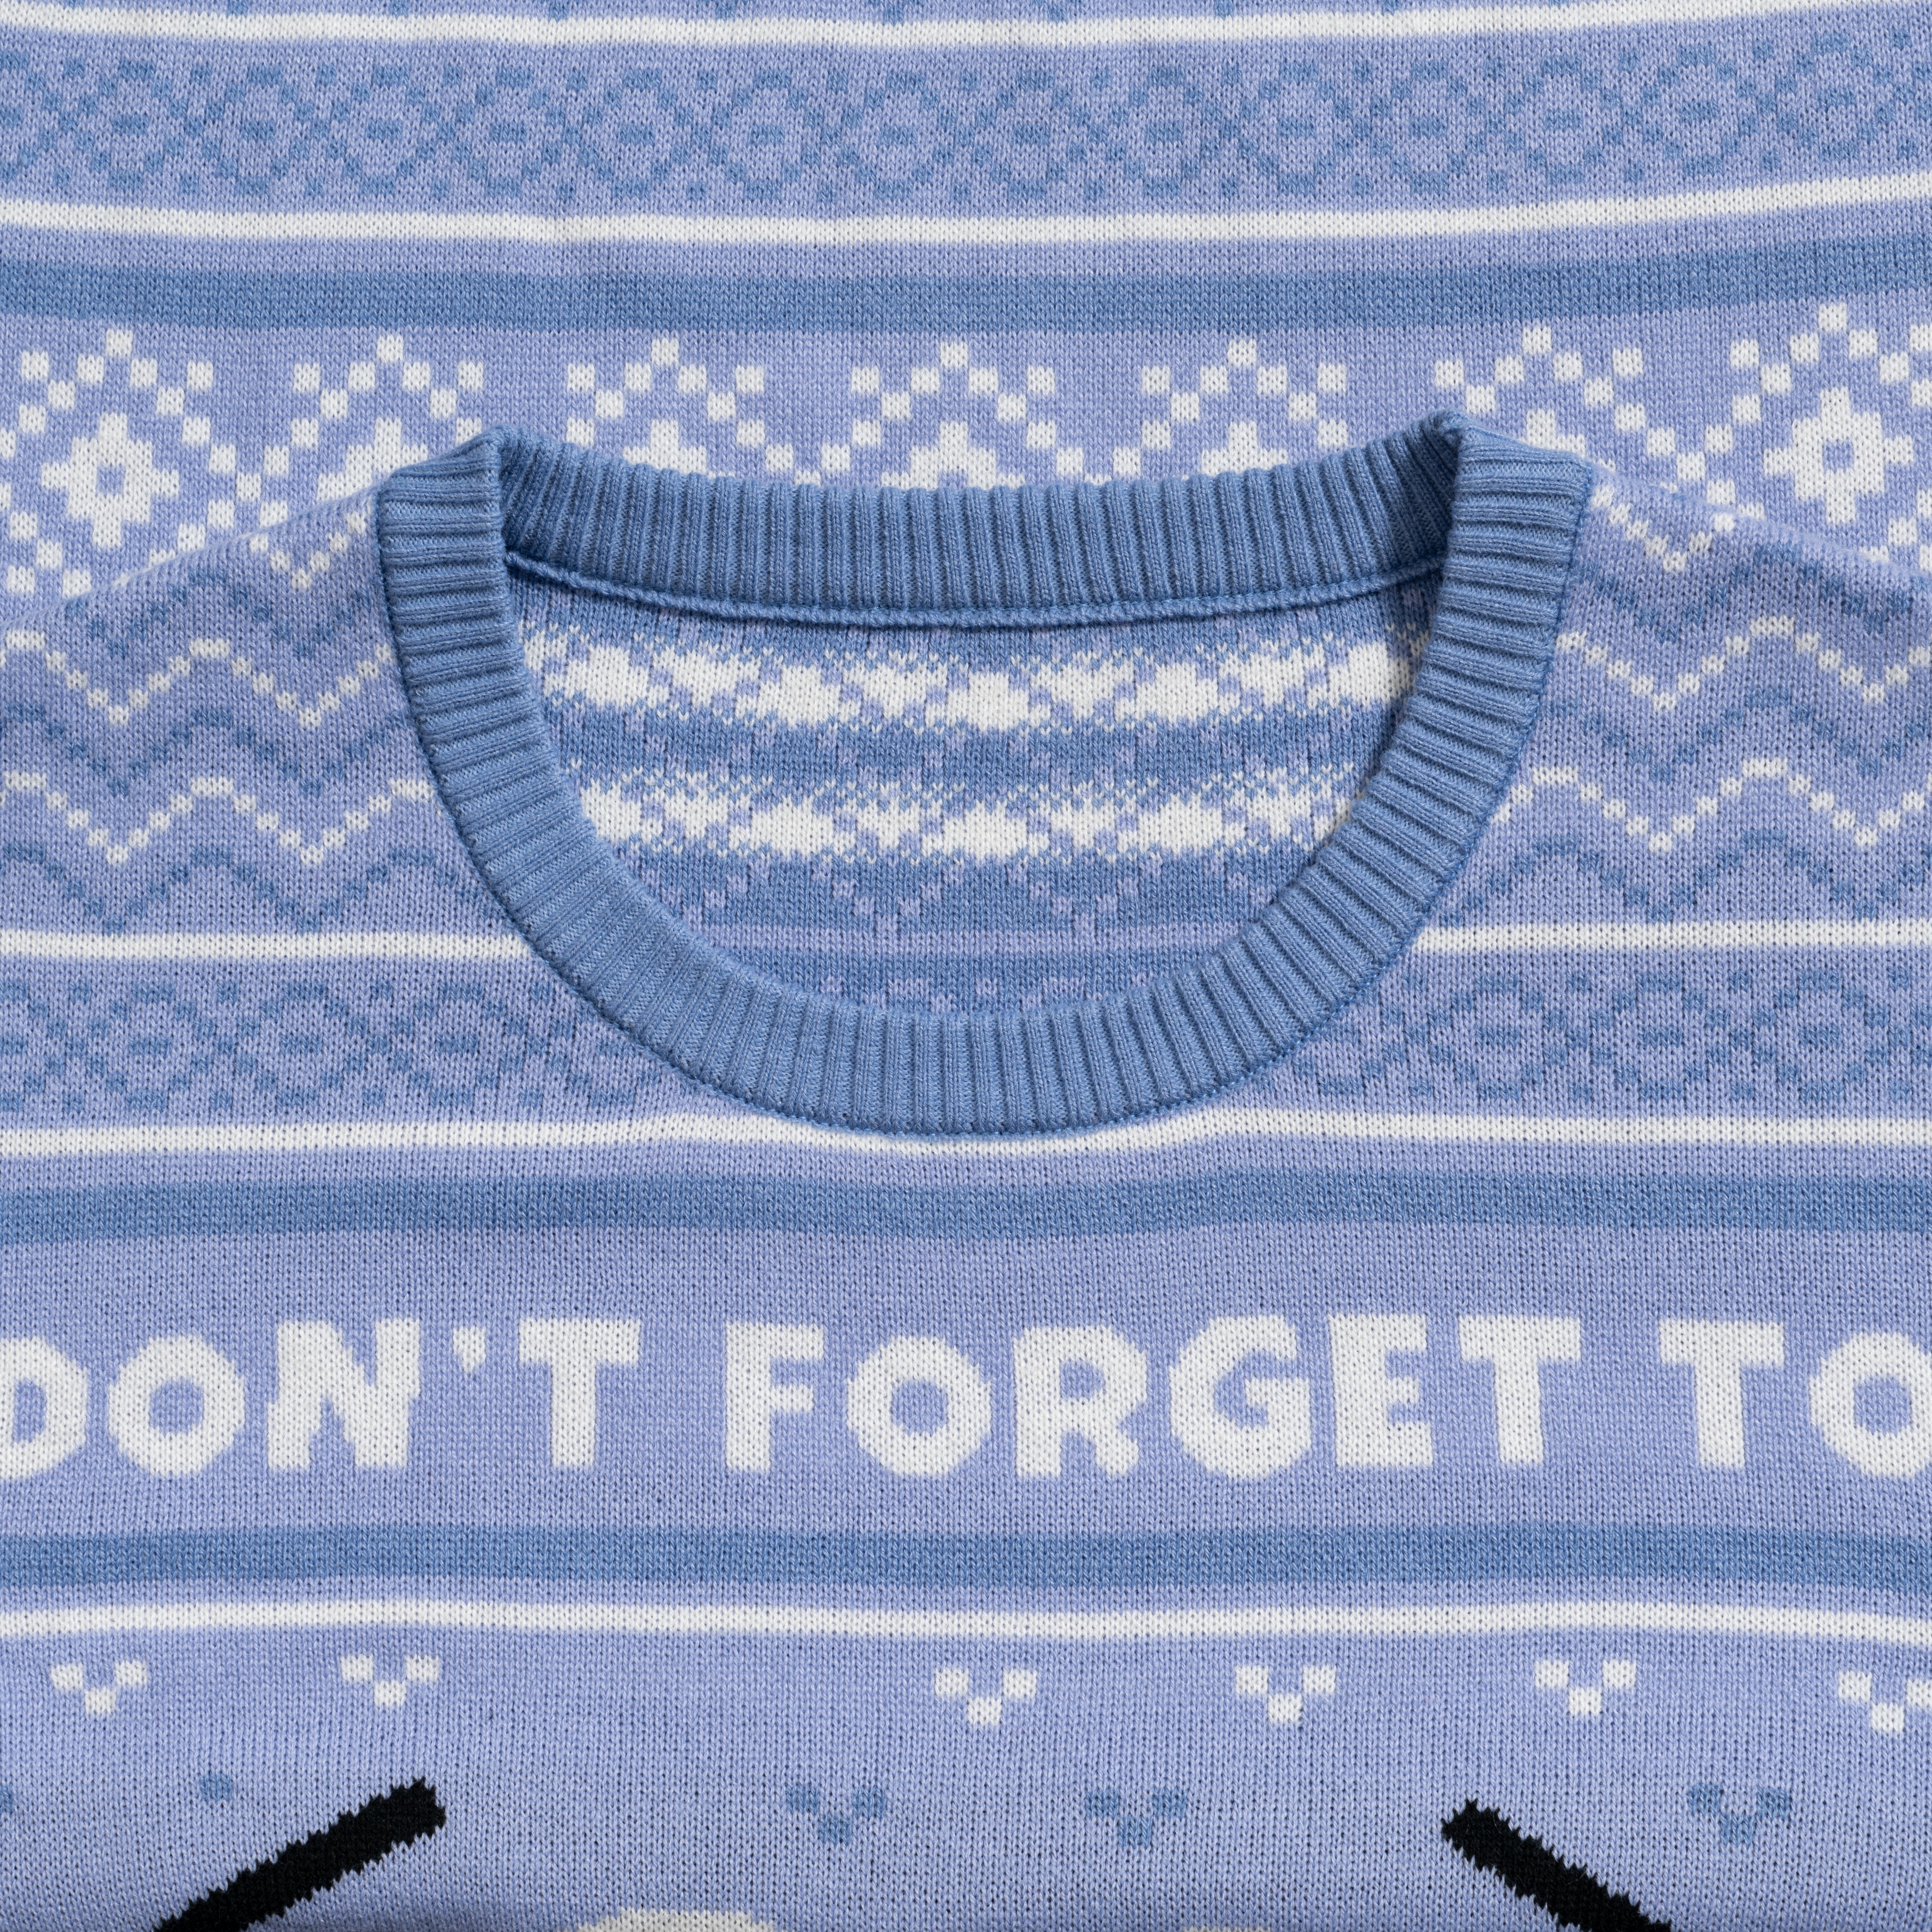 Southpark Towelie Bring A Towel Ugly Christmas Sweater